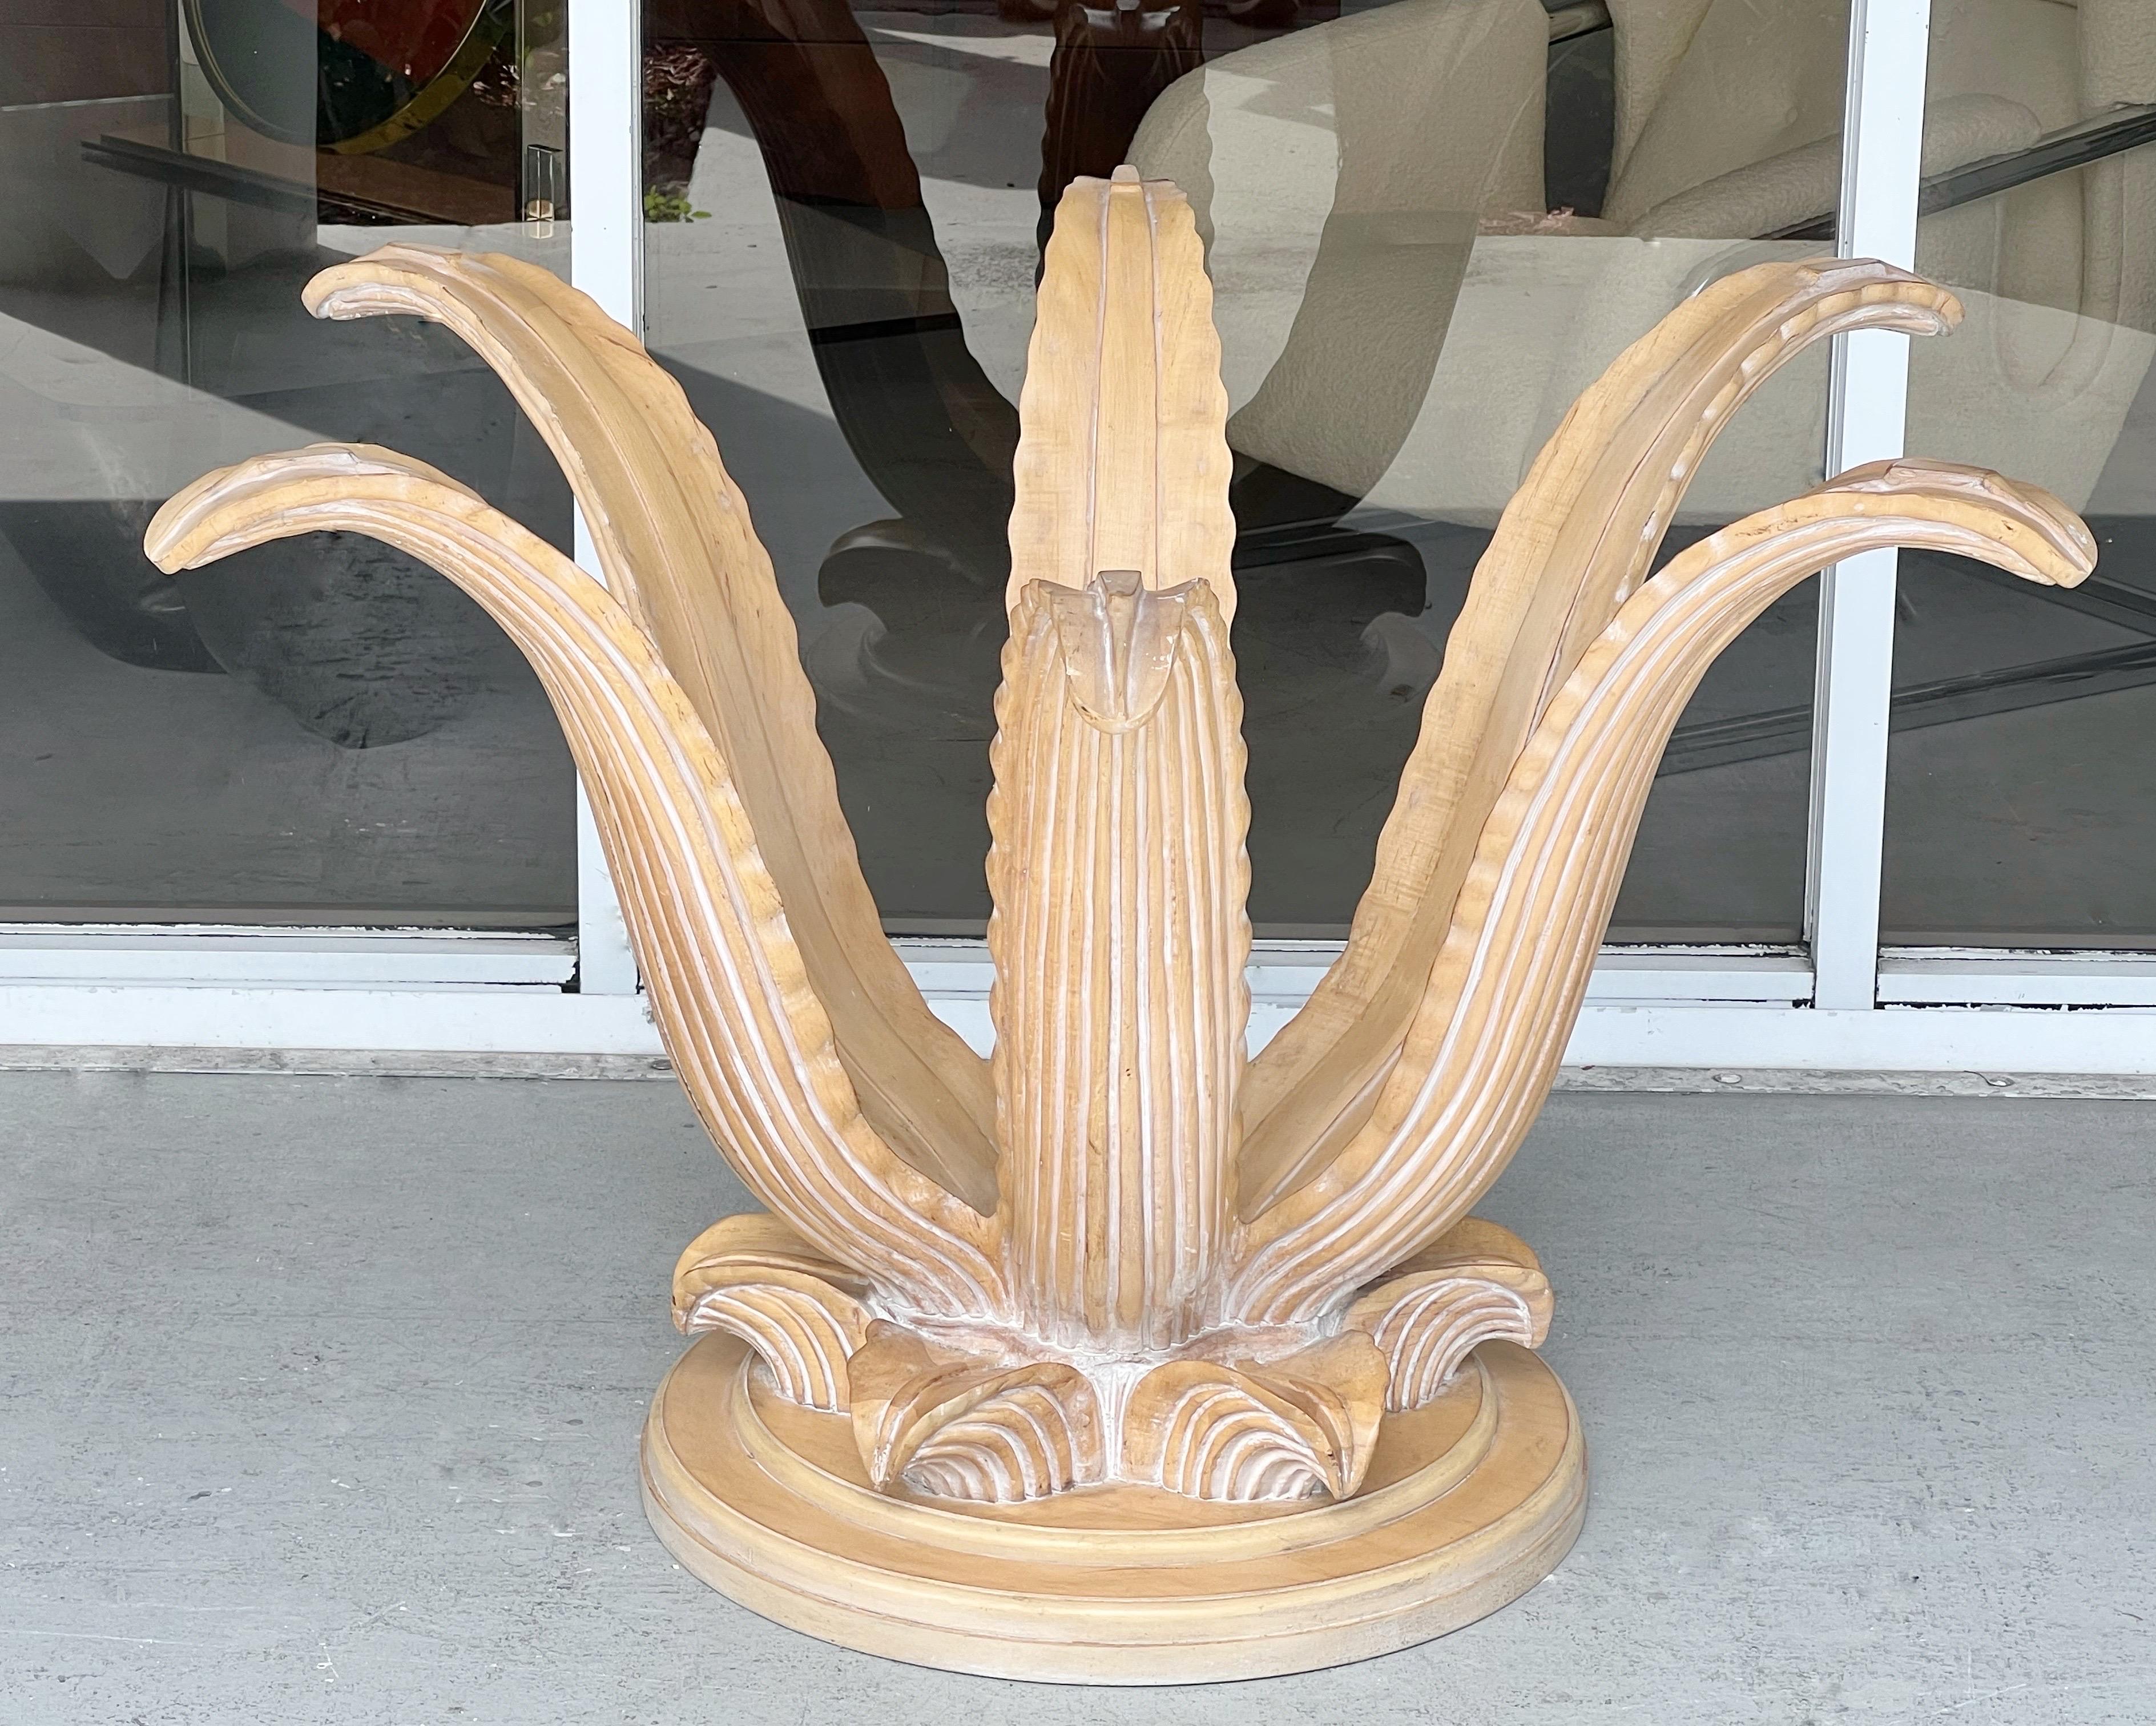 A 1970s carved wood dining table. A lifesize stylized agave plant with the leaves supporting the 60” diameter glass top. Ned’s new top. Carving is subtle and lines are graceful but restrained.